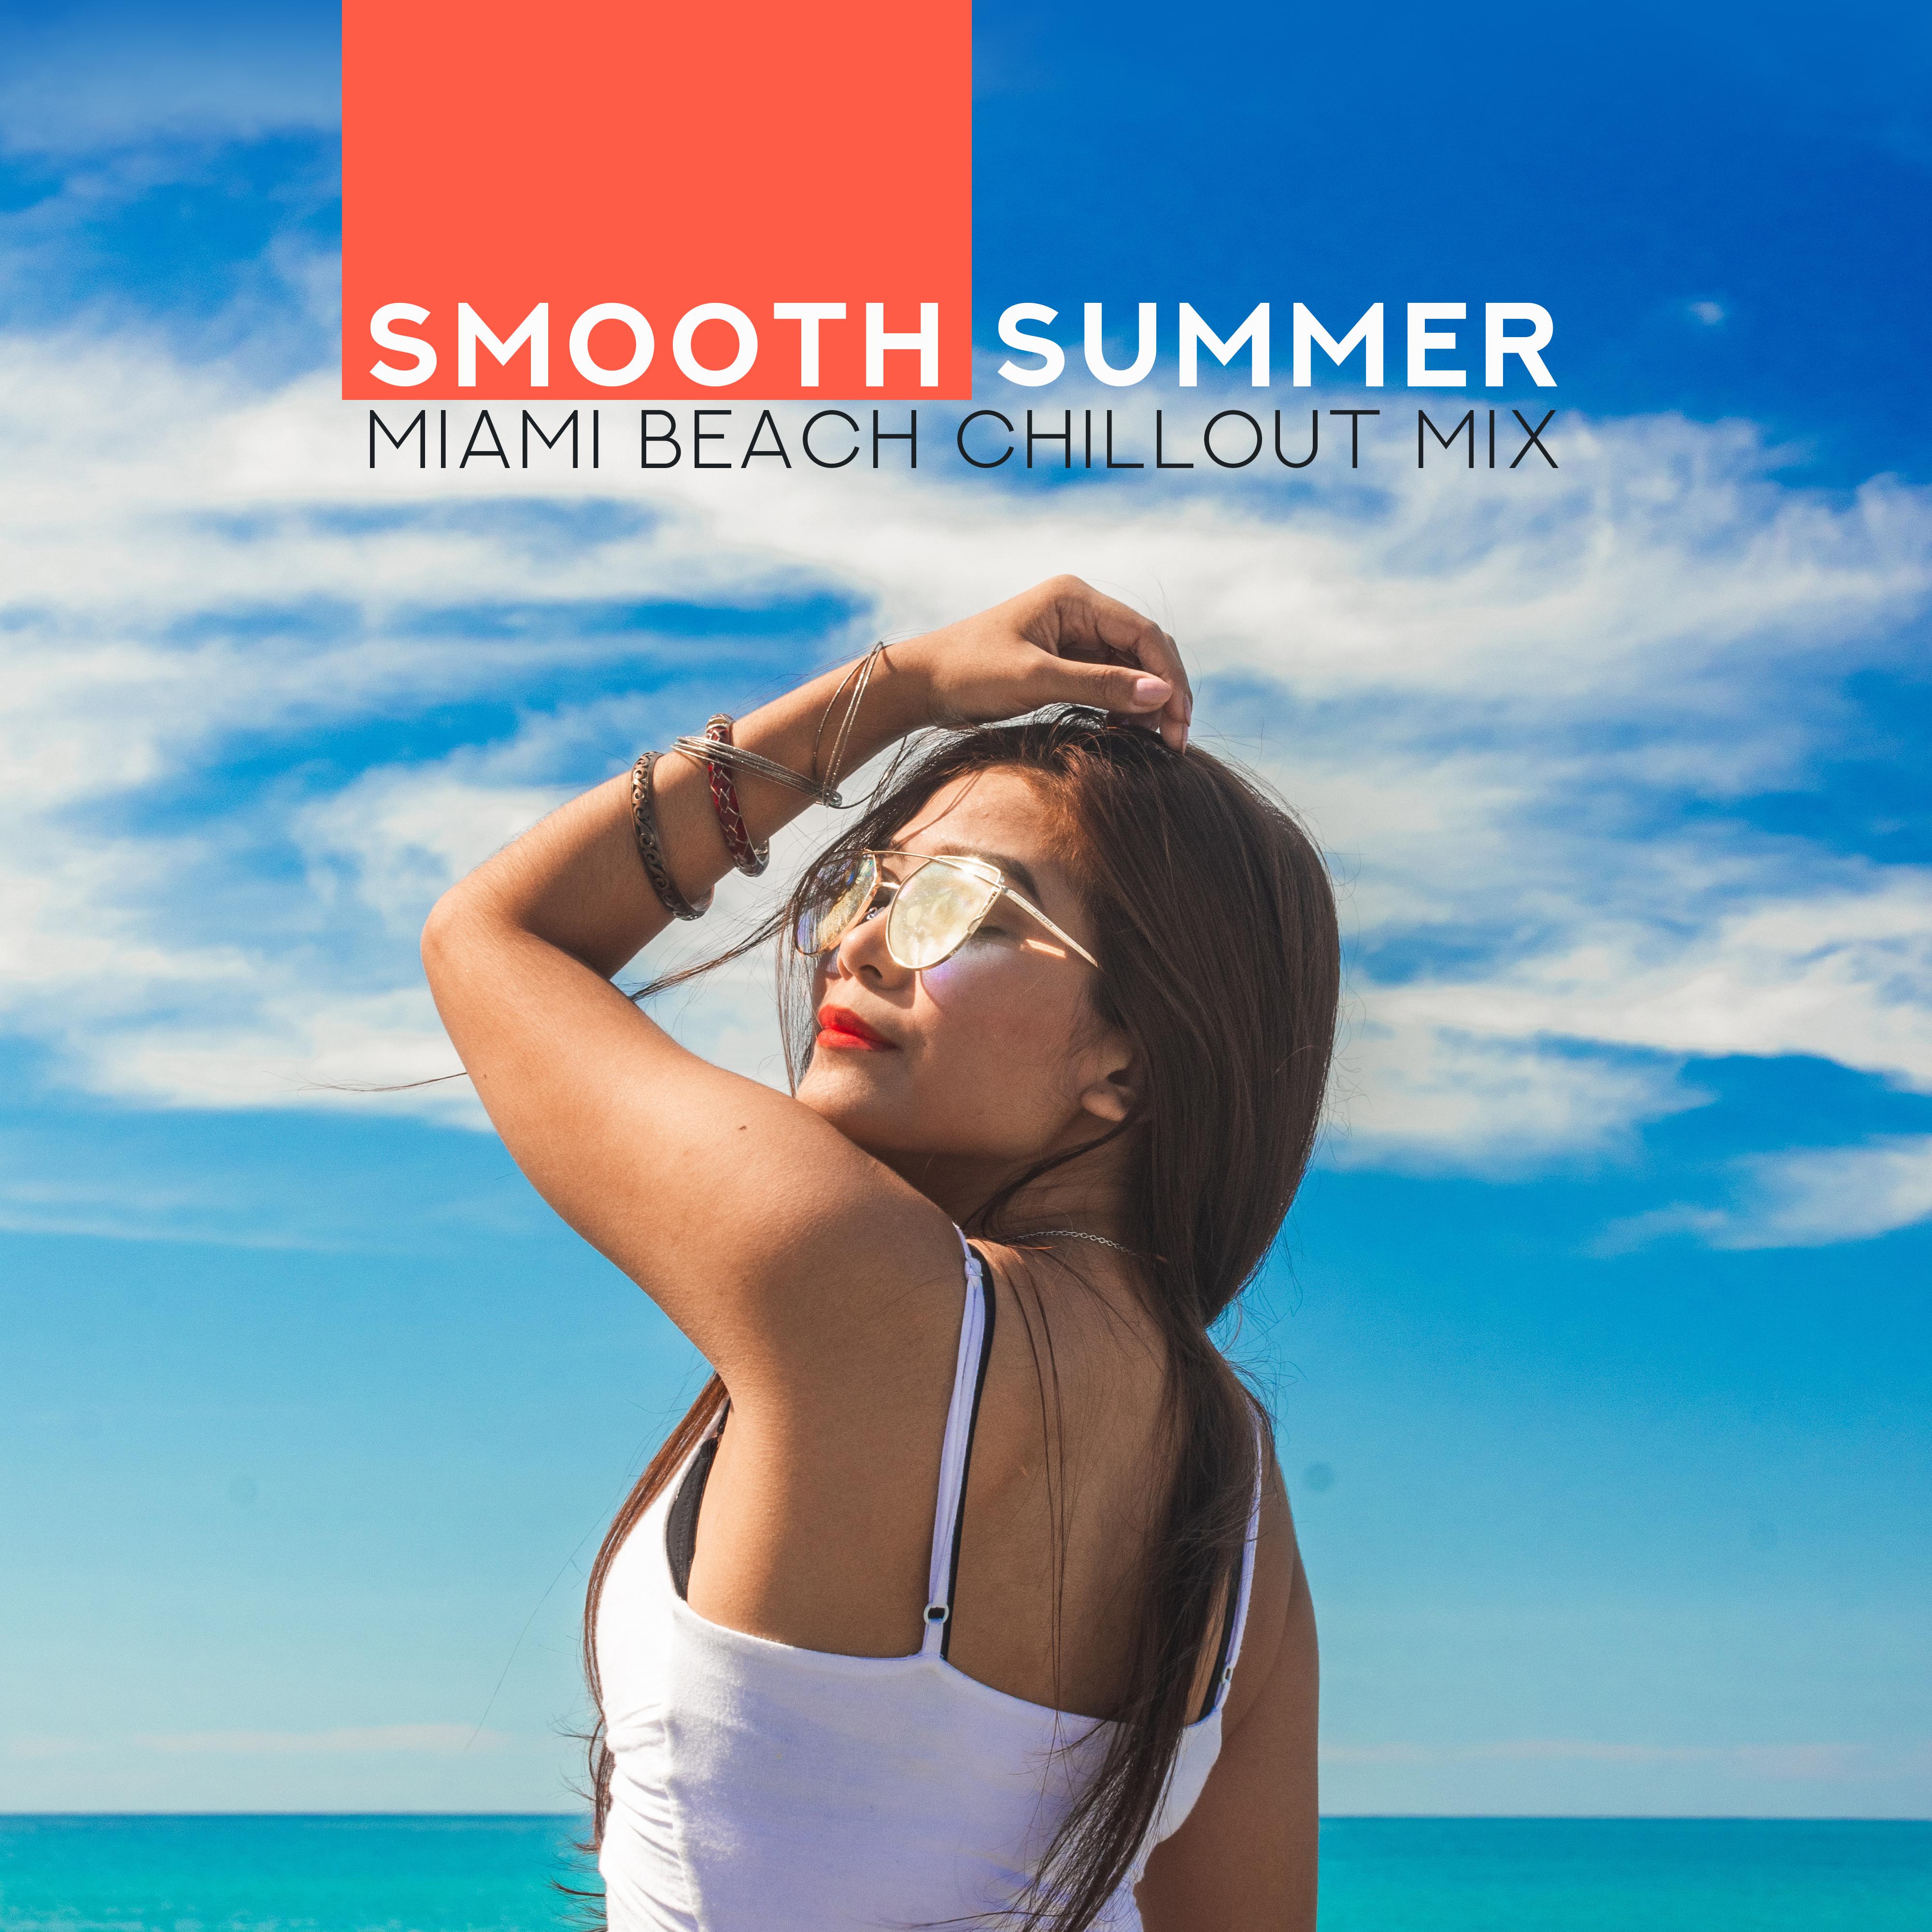 Smooth Summer Miami Beach Chillout Mix  Chill Out Best 2019 Relaxing Music, Holiday Soft Beats, Sunbathing Slow Songs